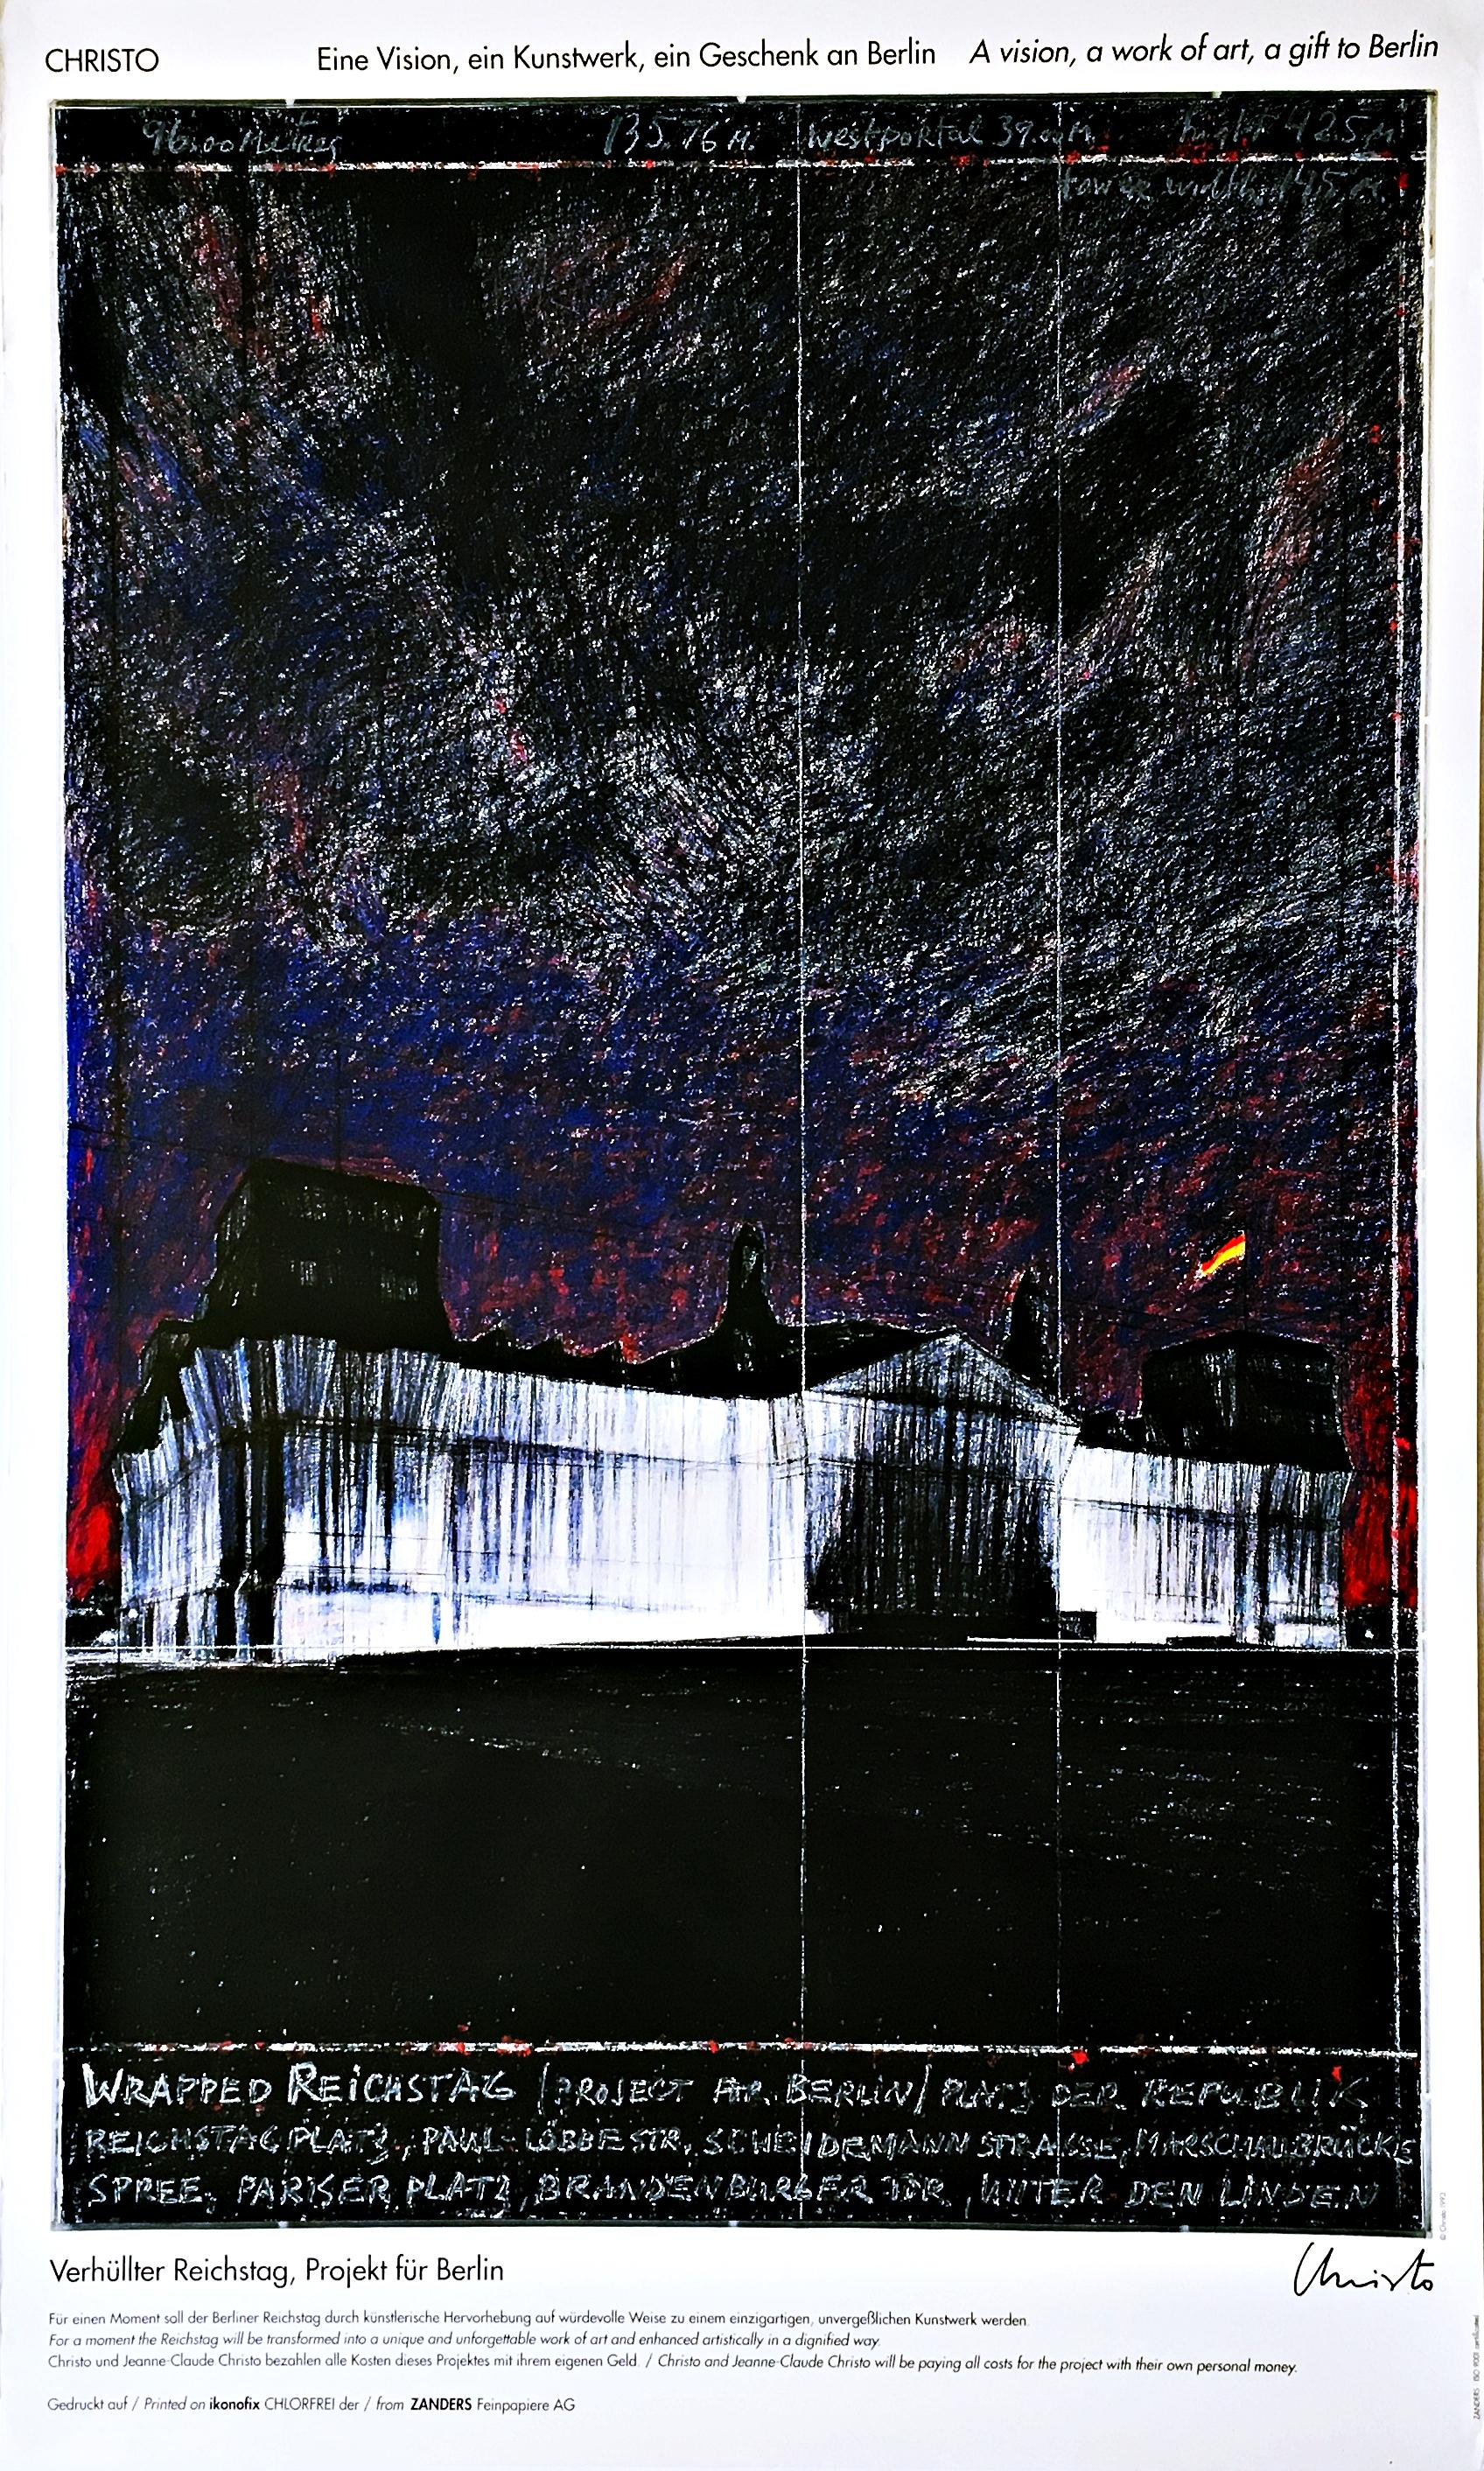 Christo
The Wrapped Reichstag at Night (Hand Signed), 1993
Offset Lithograph 
Hand signed by Christo on lower right front
40 × 25 1/2 inches
Unframed and affixed to matting (as it had been previously framed), which will frame out beautifully 
This